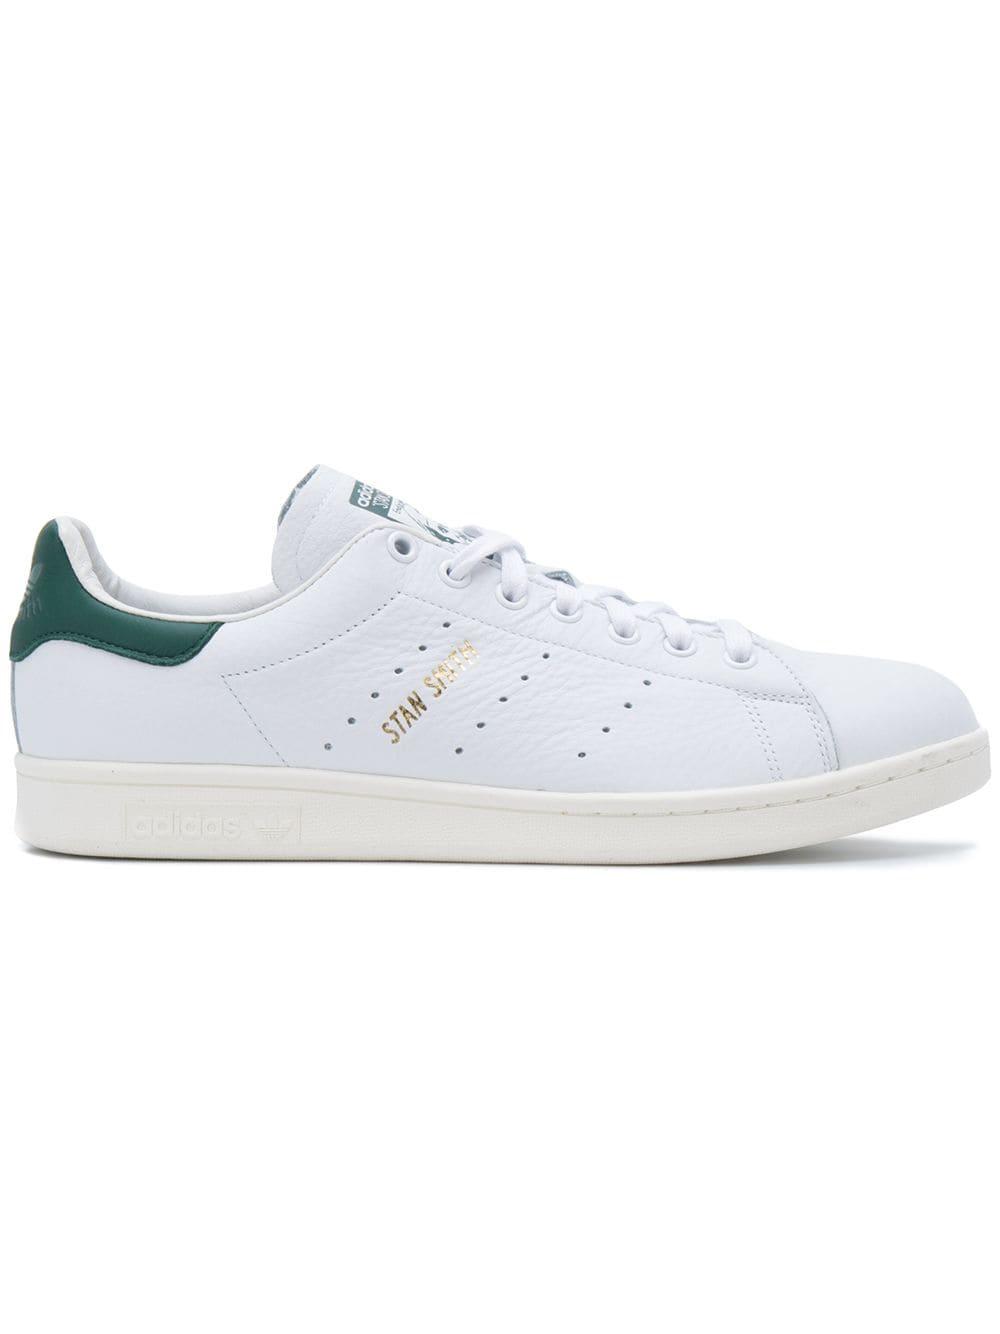 adidas Stan Smith Cf Shoes - Size 12 in White - Save 53% - Lyst